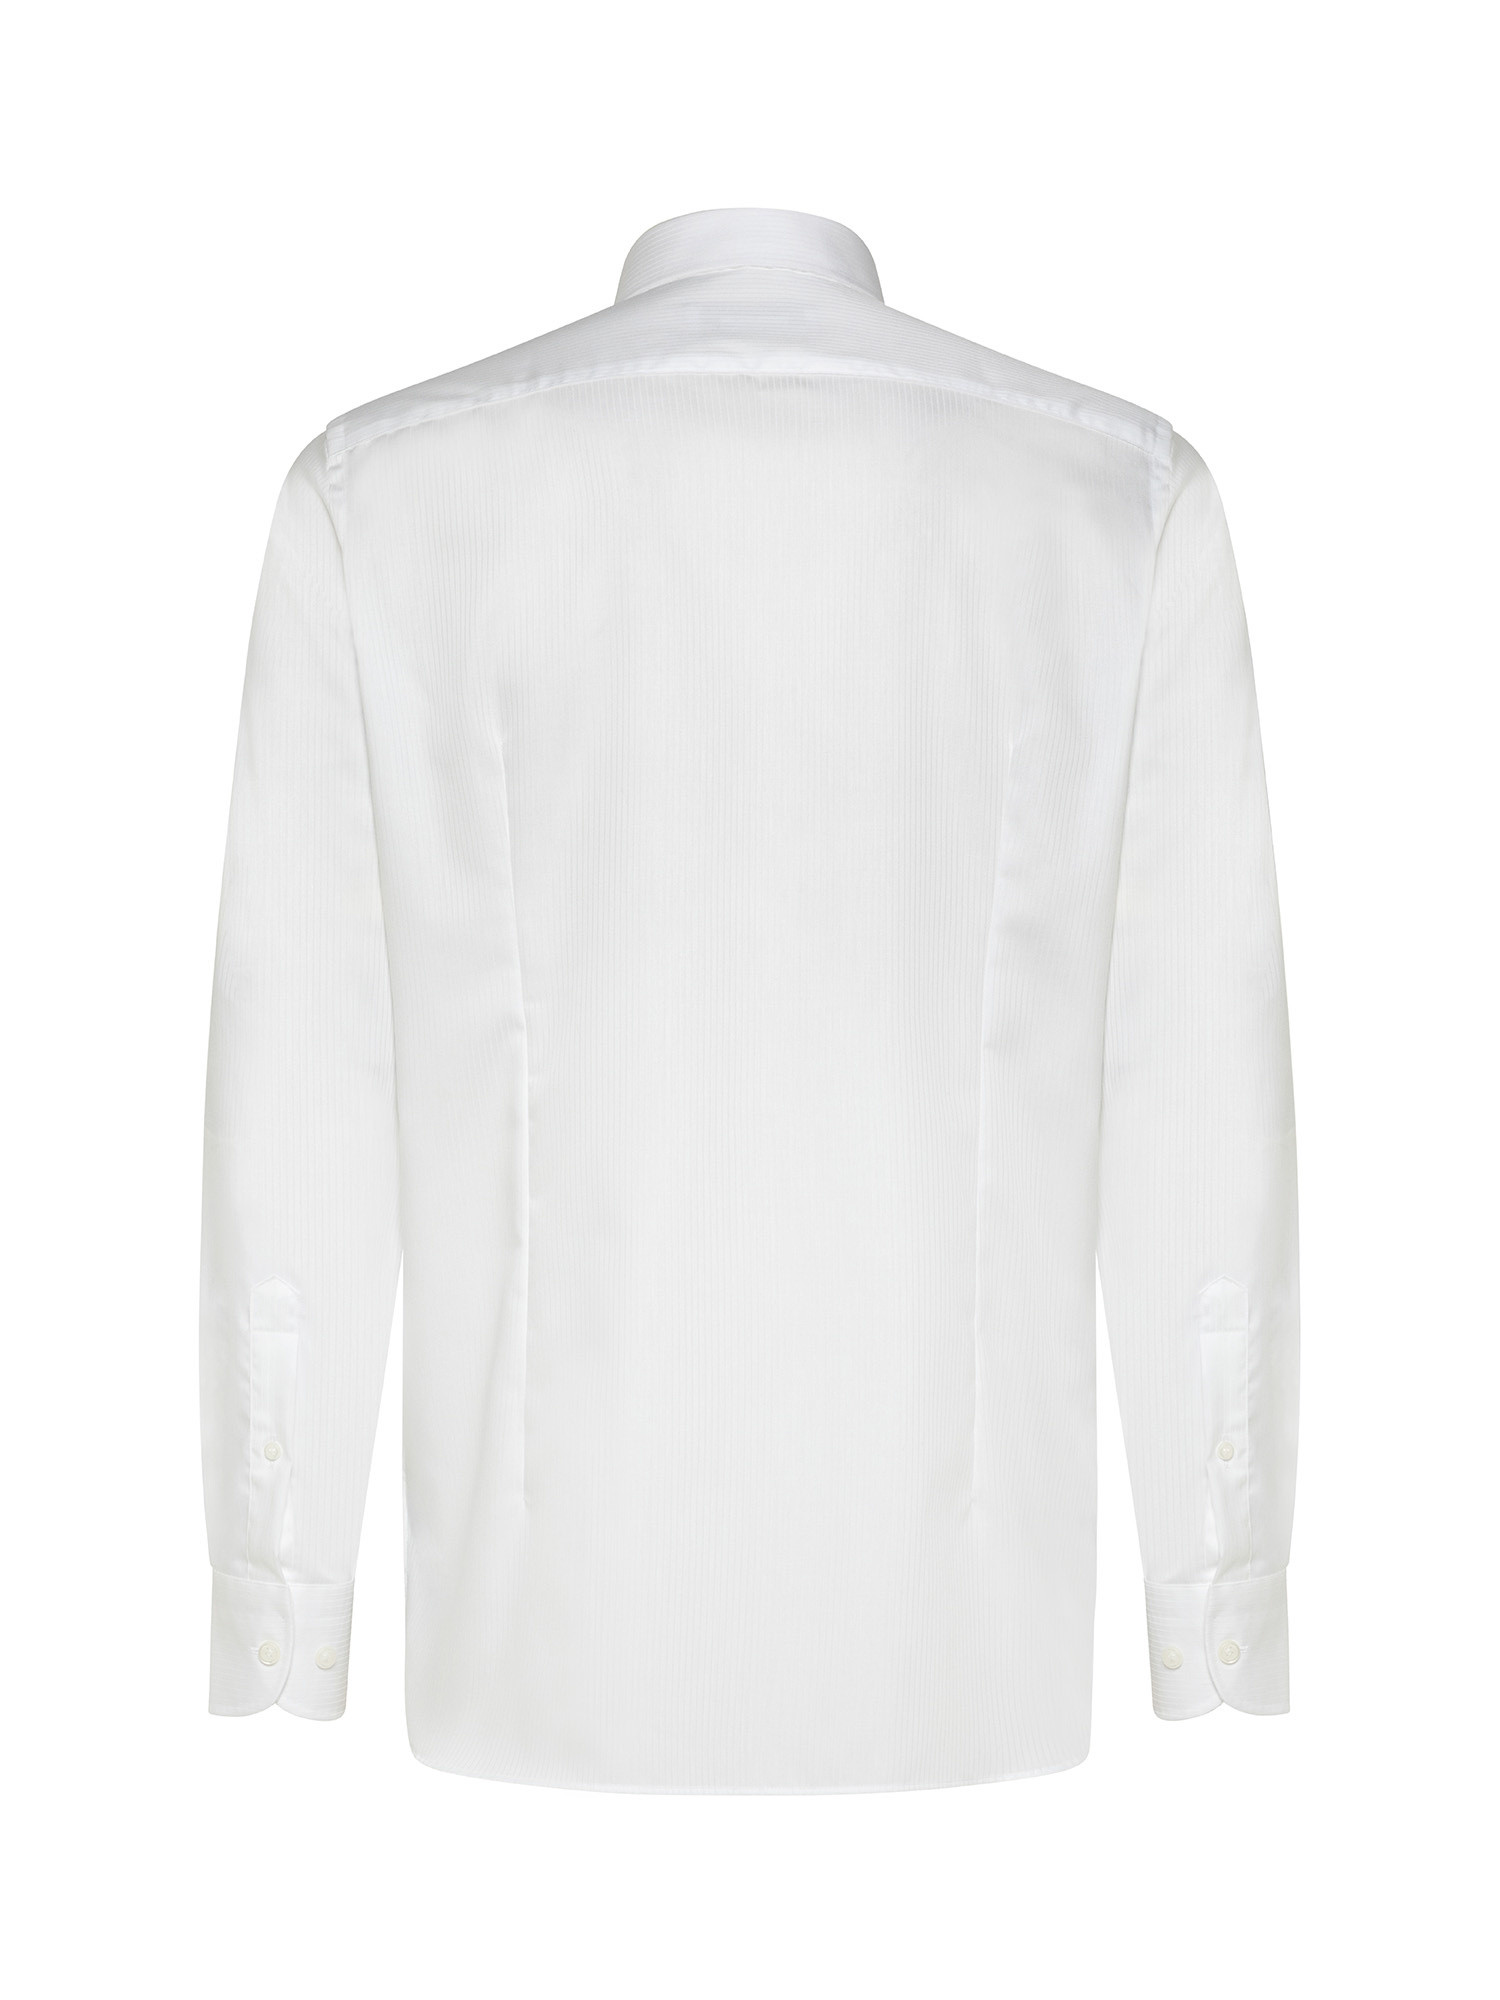 Slim fit shirt in pure cotton, White 3, large image number 2